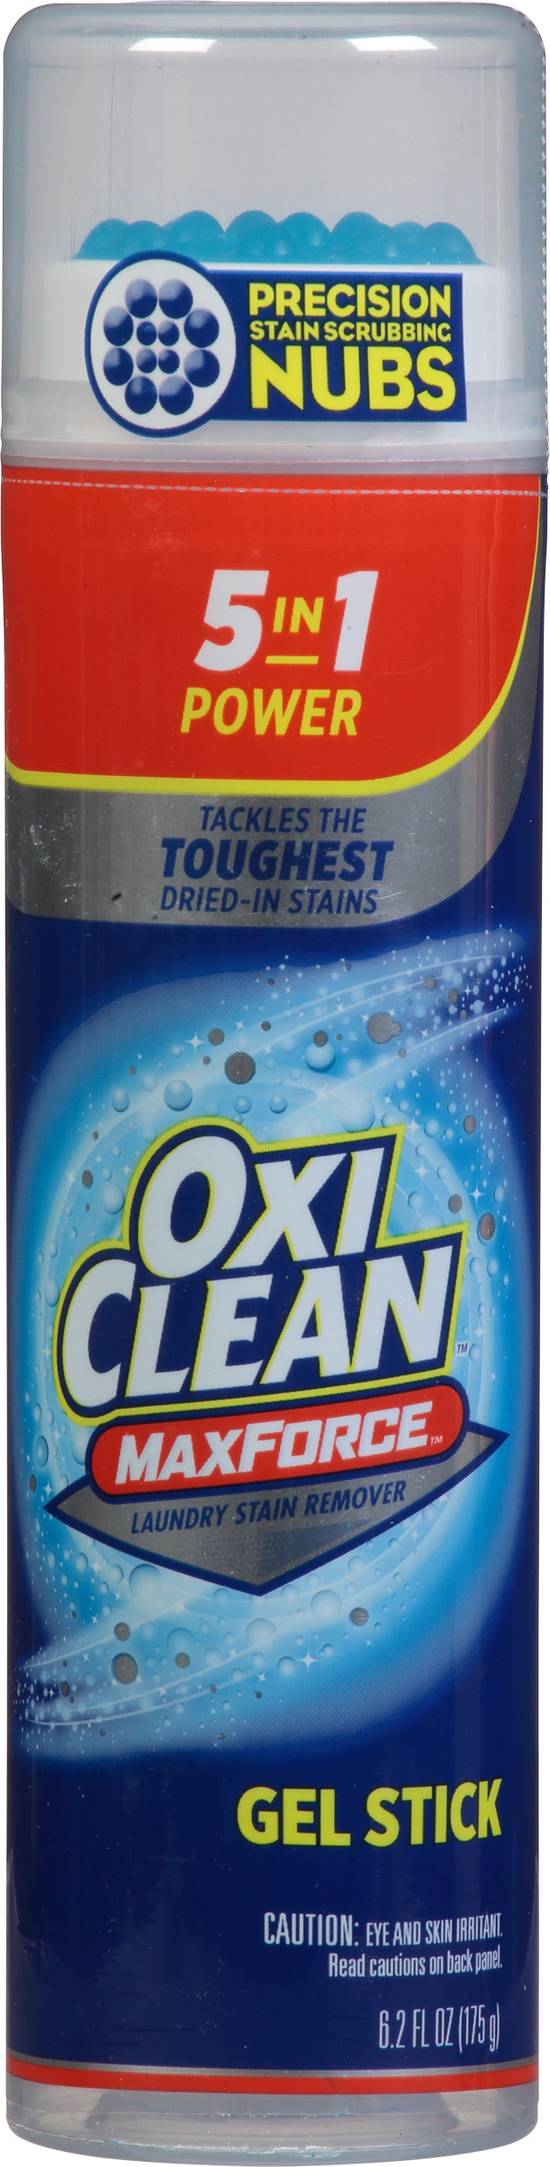 Oxiclean Max Force Laundry Stain Remover Gel Stick (6.2 fl oz)